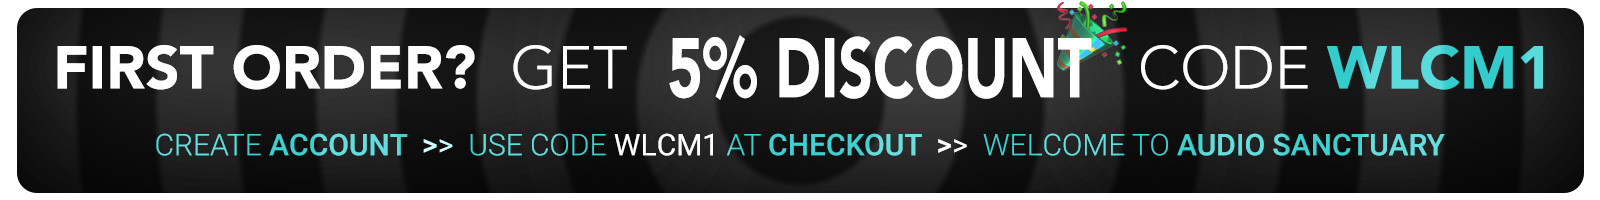 New customer? Get 5% discount on your first order! | Audio Sanctuary.